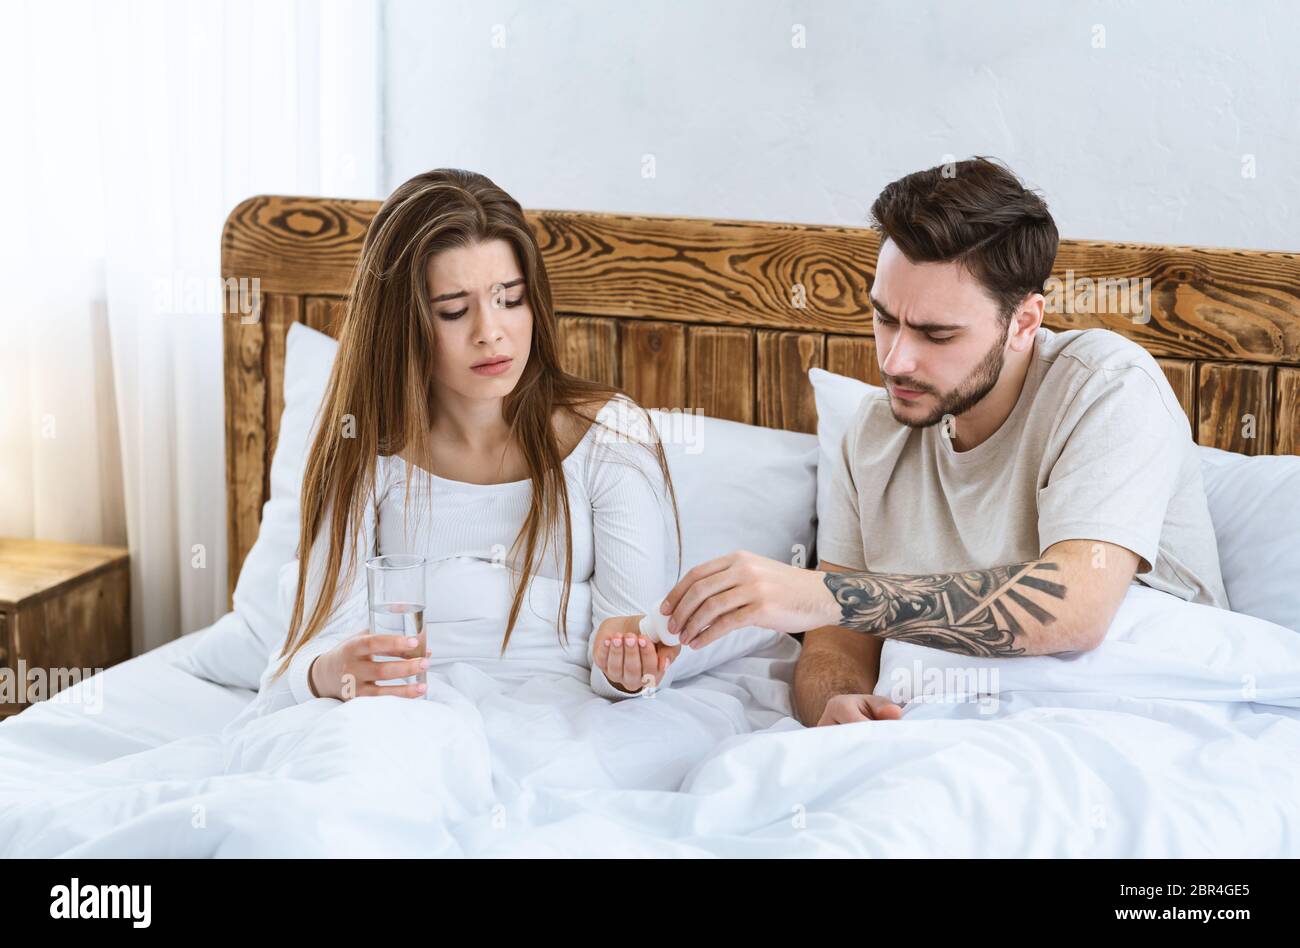 Home treatment. Sad man and woman are sitting in bed Stock Photo